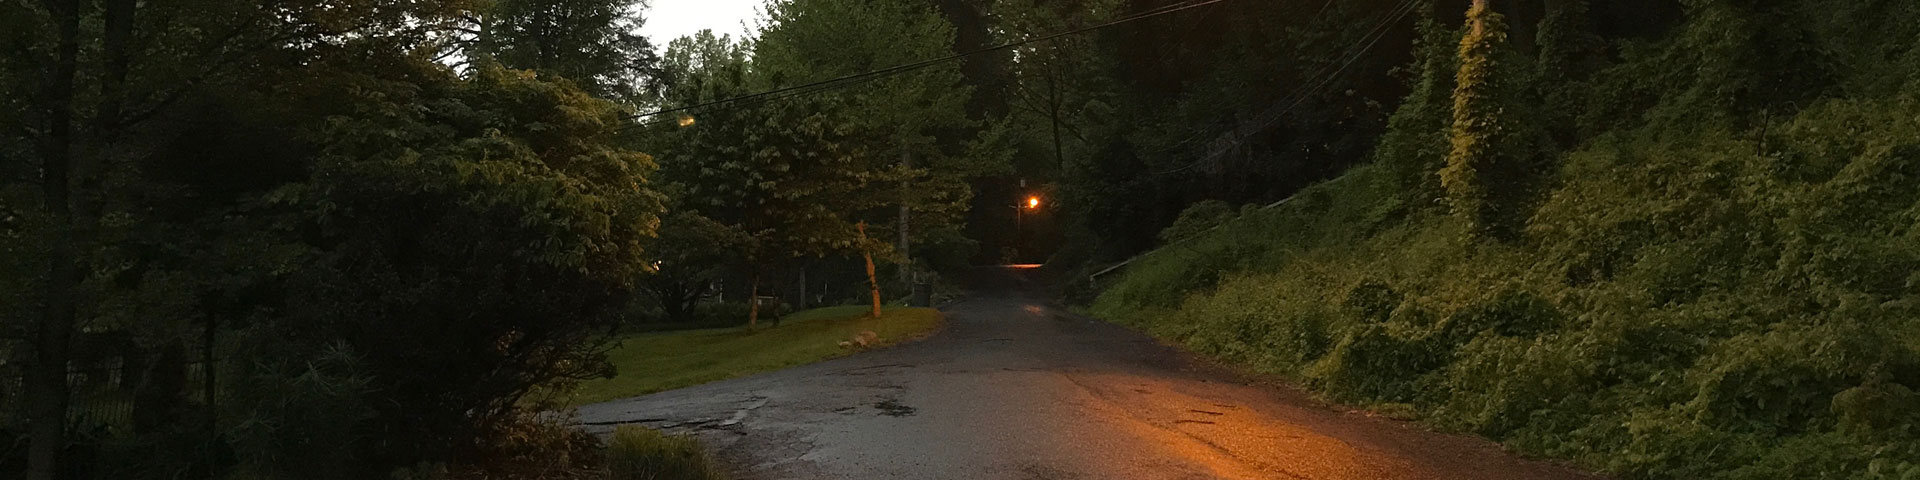 Rain clouds overhead, dark trees barely illuminated in the morning light. A street lamp glows to the right.